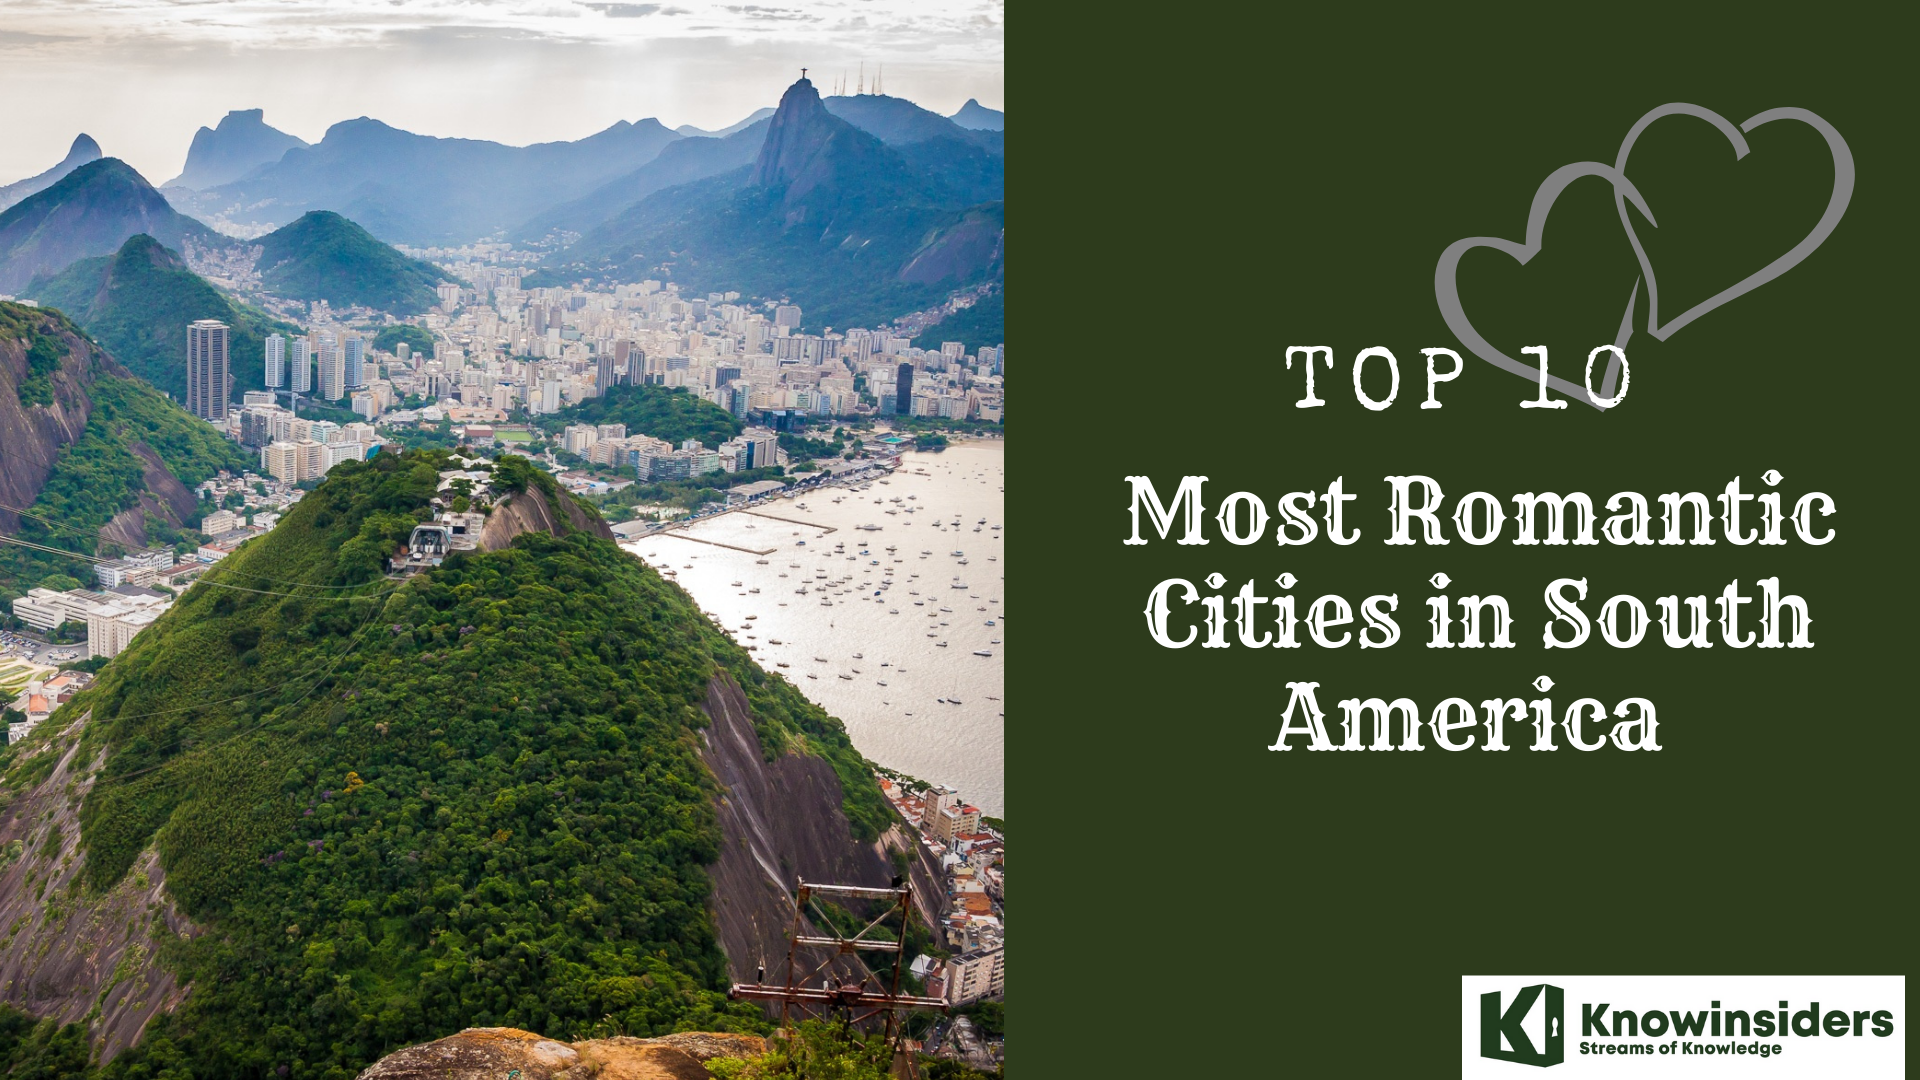 Top 10 Most Romantic Cities in South America